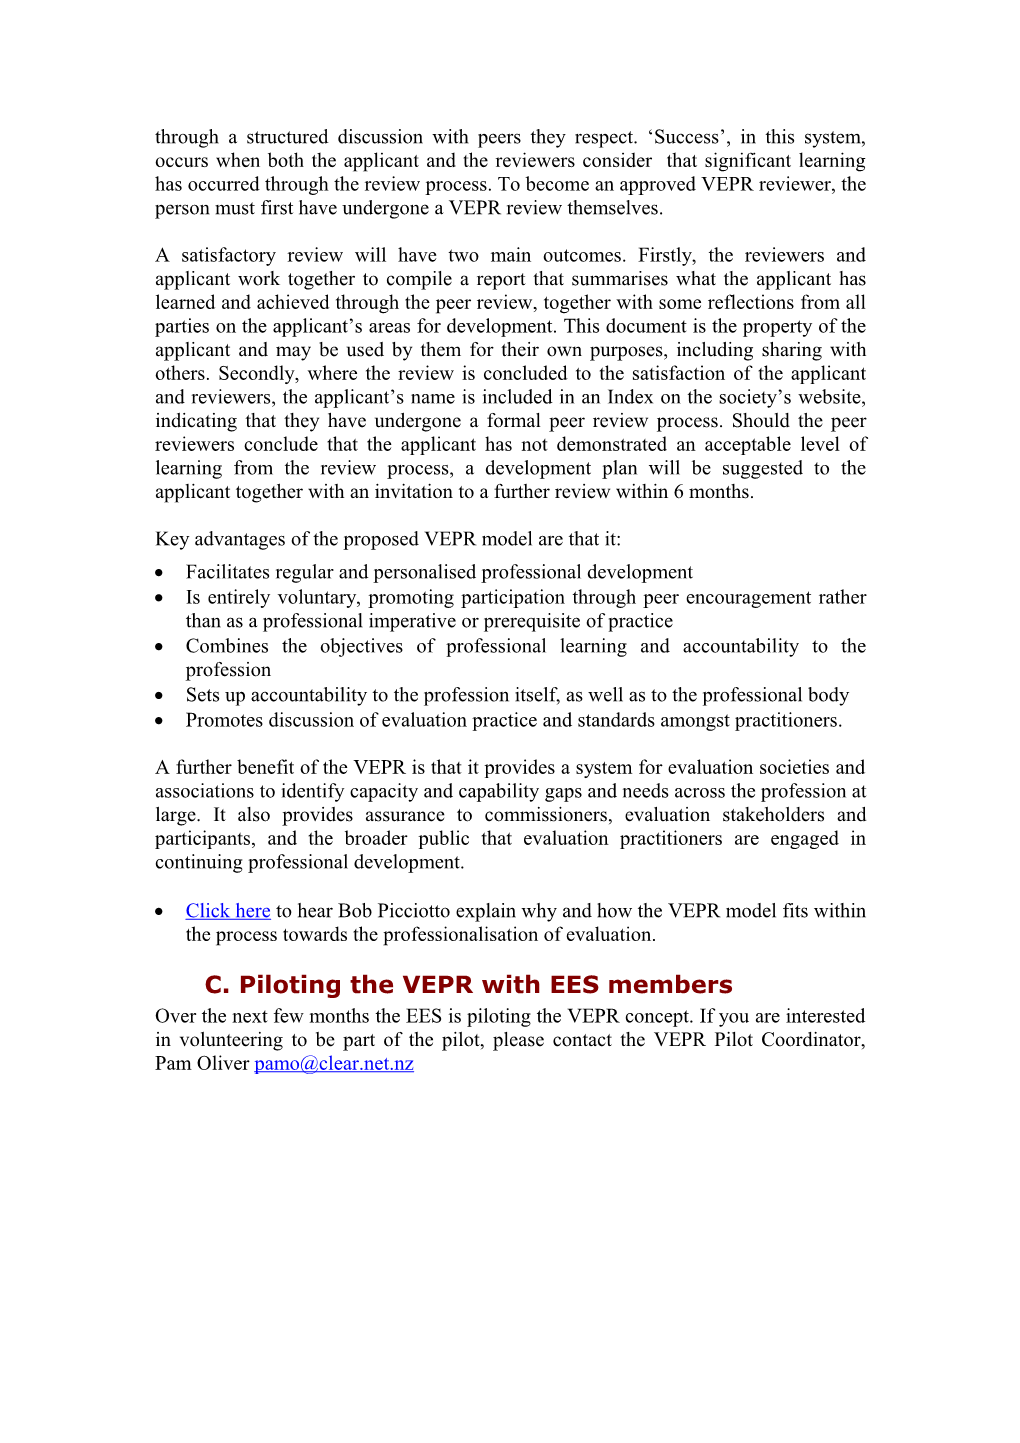 Introducing a Voluntary Evaluator Peer Review (VEPR) Initiative for EES